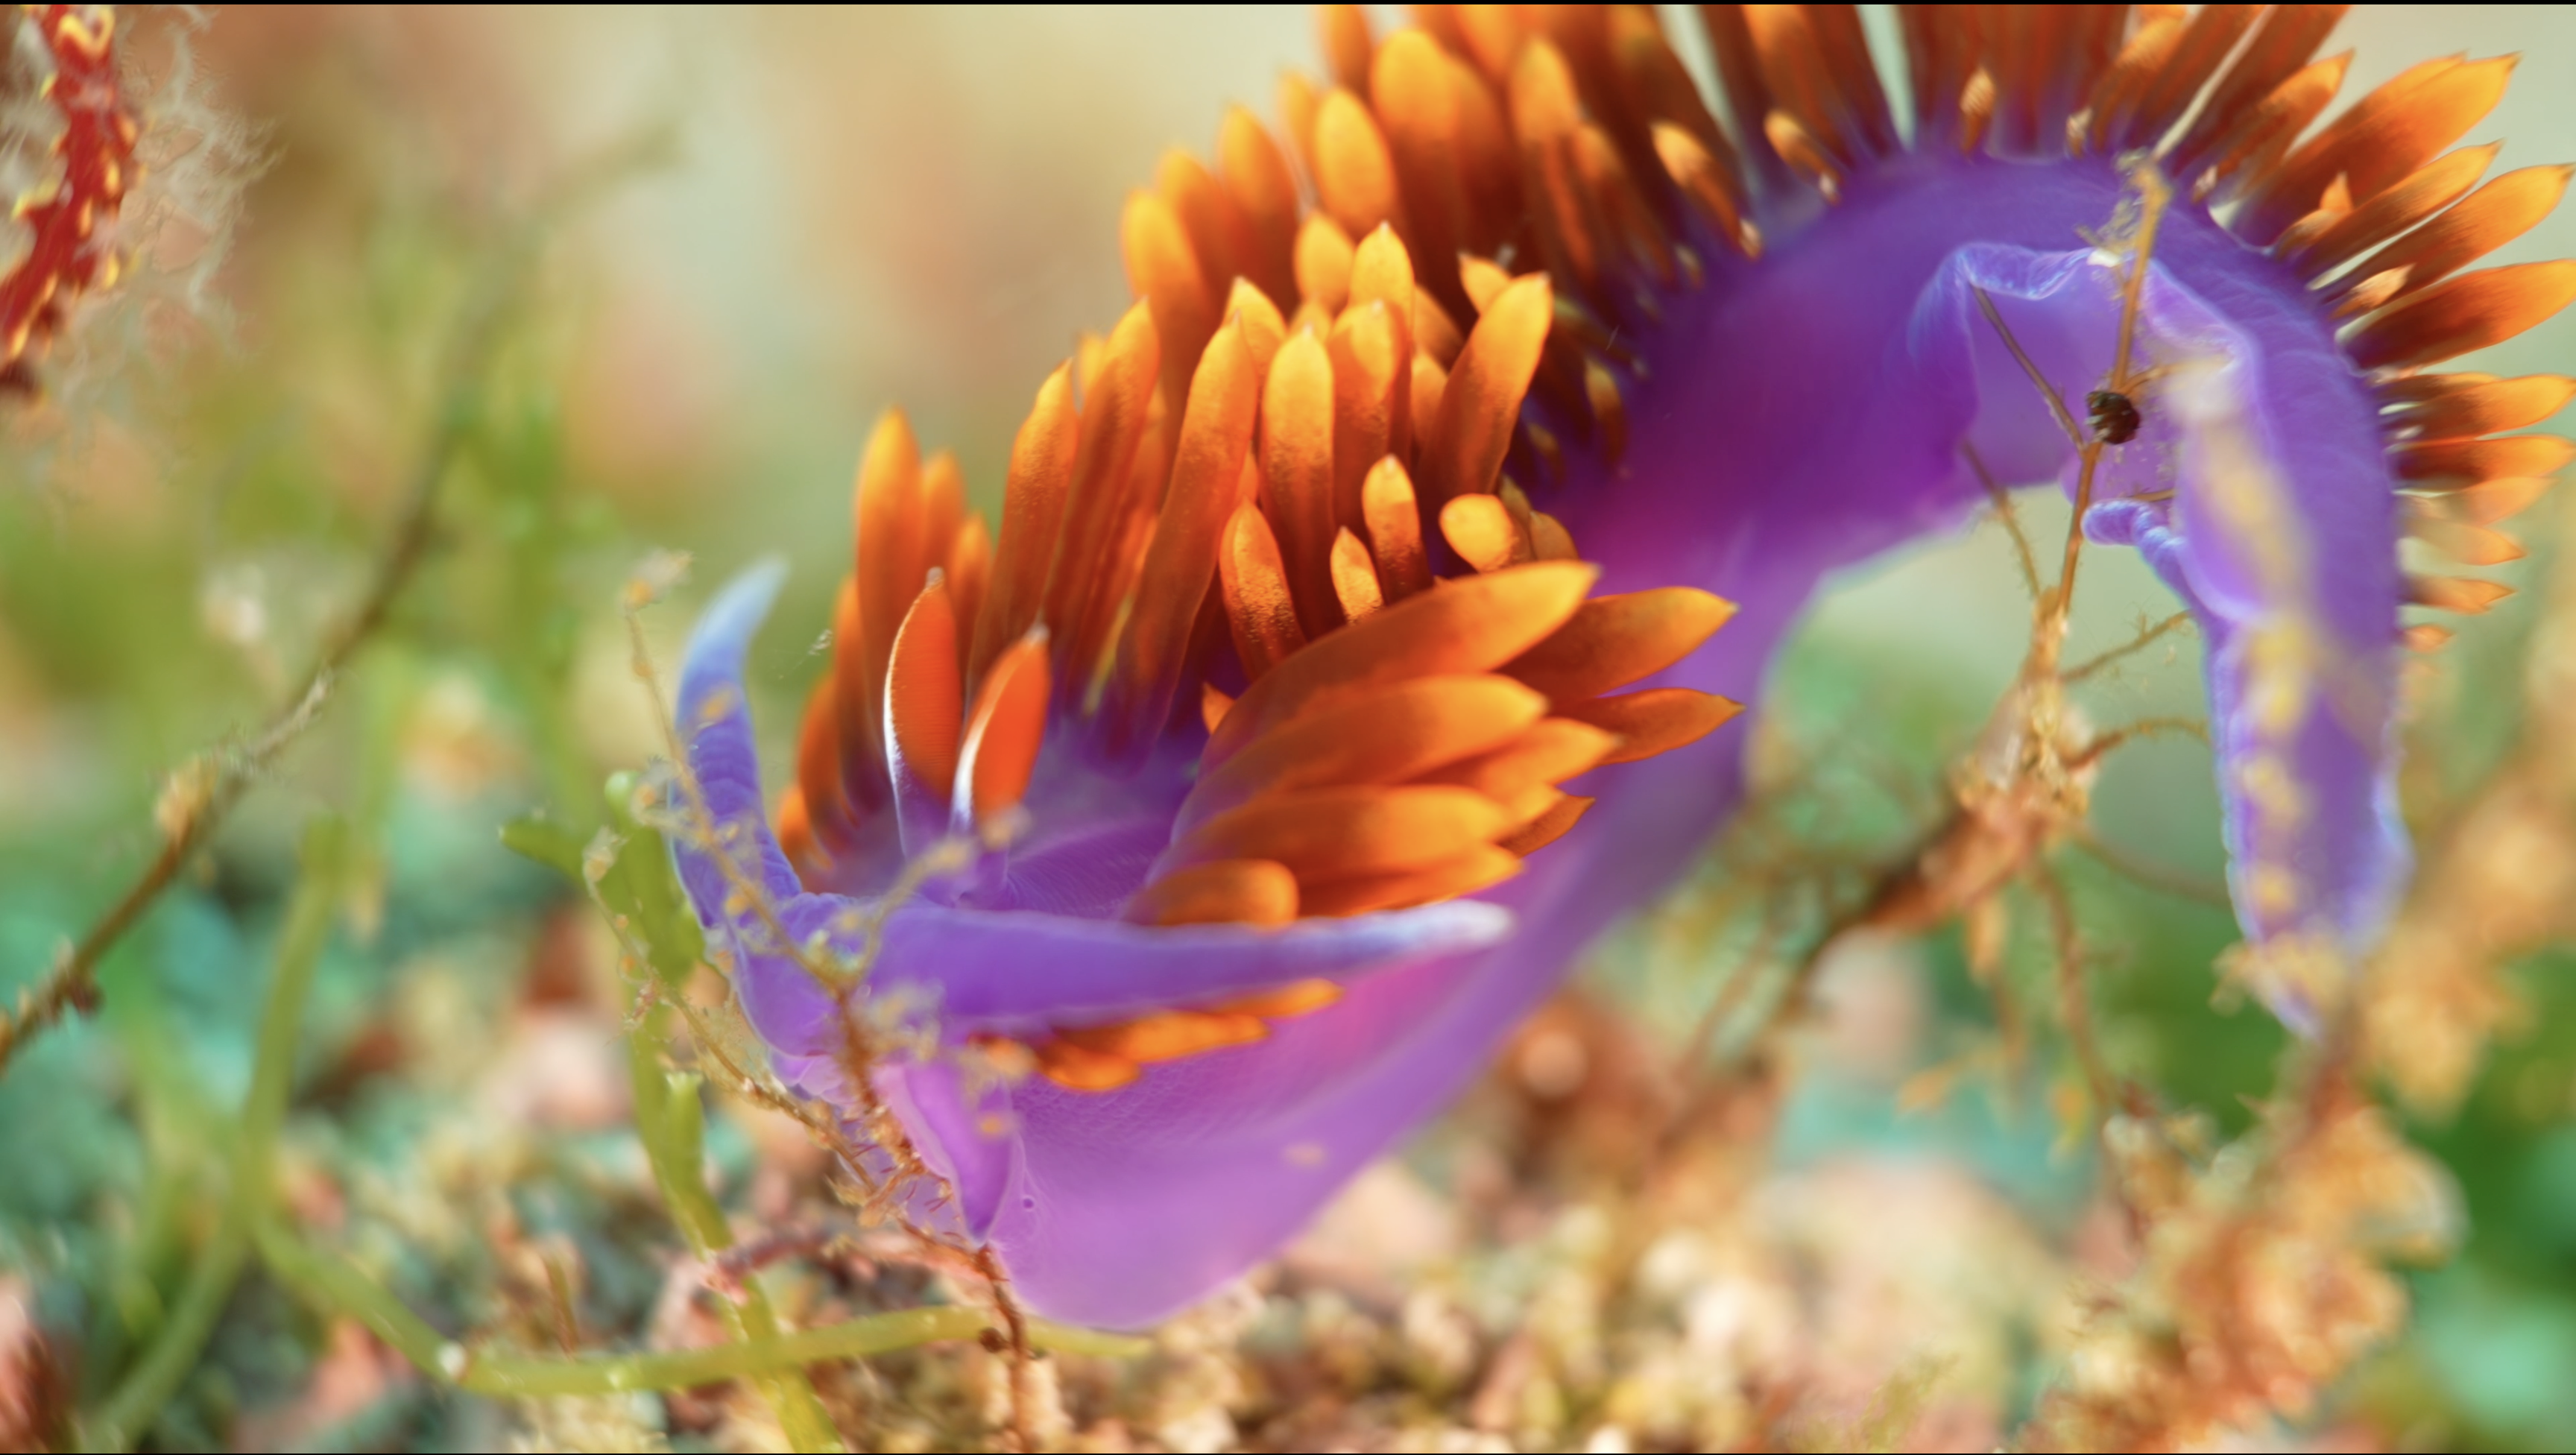  Sea of Cortez: Pervaiz says the Spanish shawl is the most colorful sea slug. The orange gills on their backs serve as a warning to potential predators. “Sometimes,” he says, “you see so many new things, it’s almost sensory overload.” 